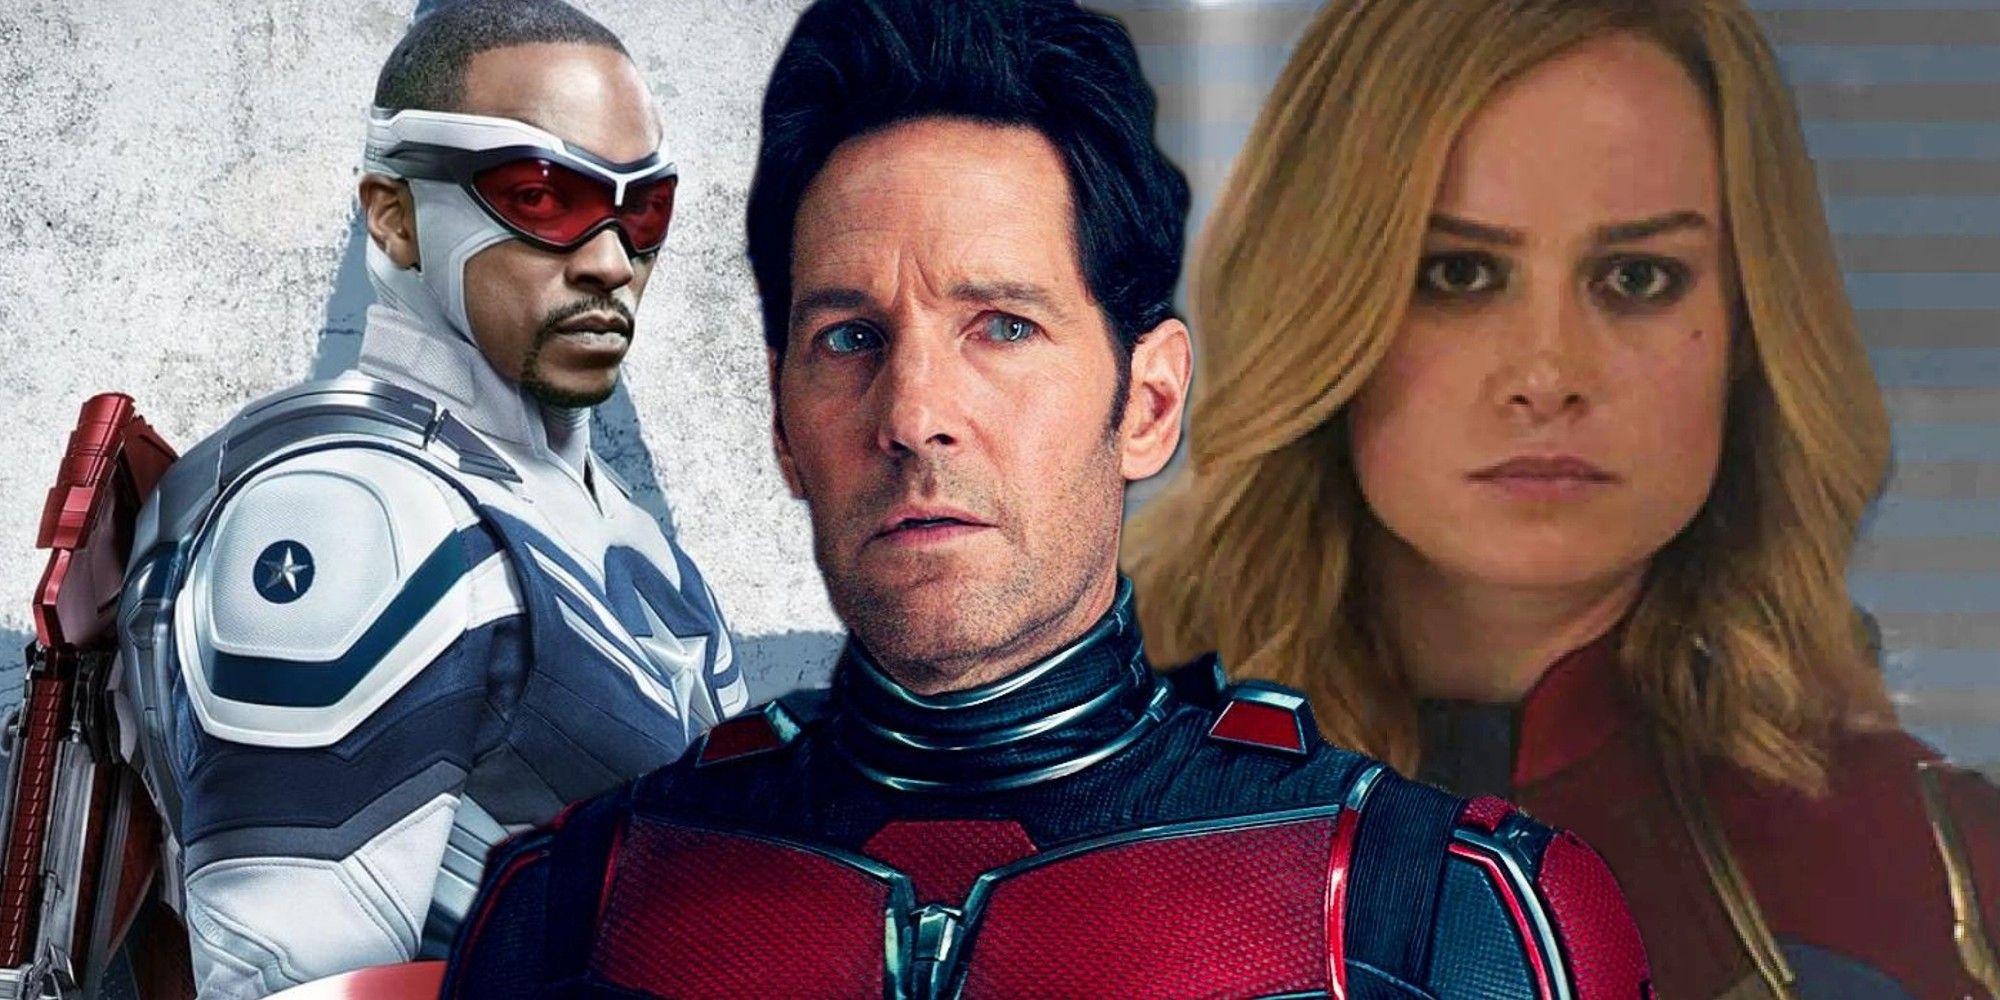 Ant-Man 3 sets unfortunate new Rotten Tomatoes milestone for Marvel